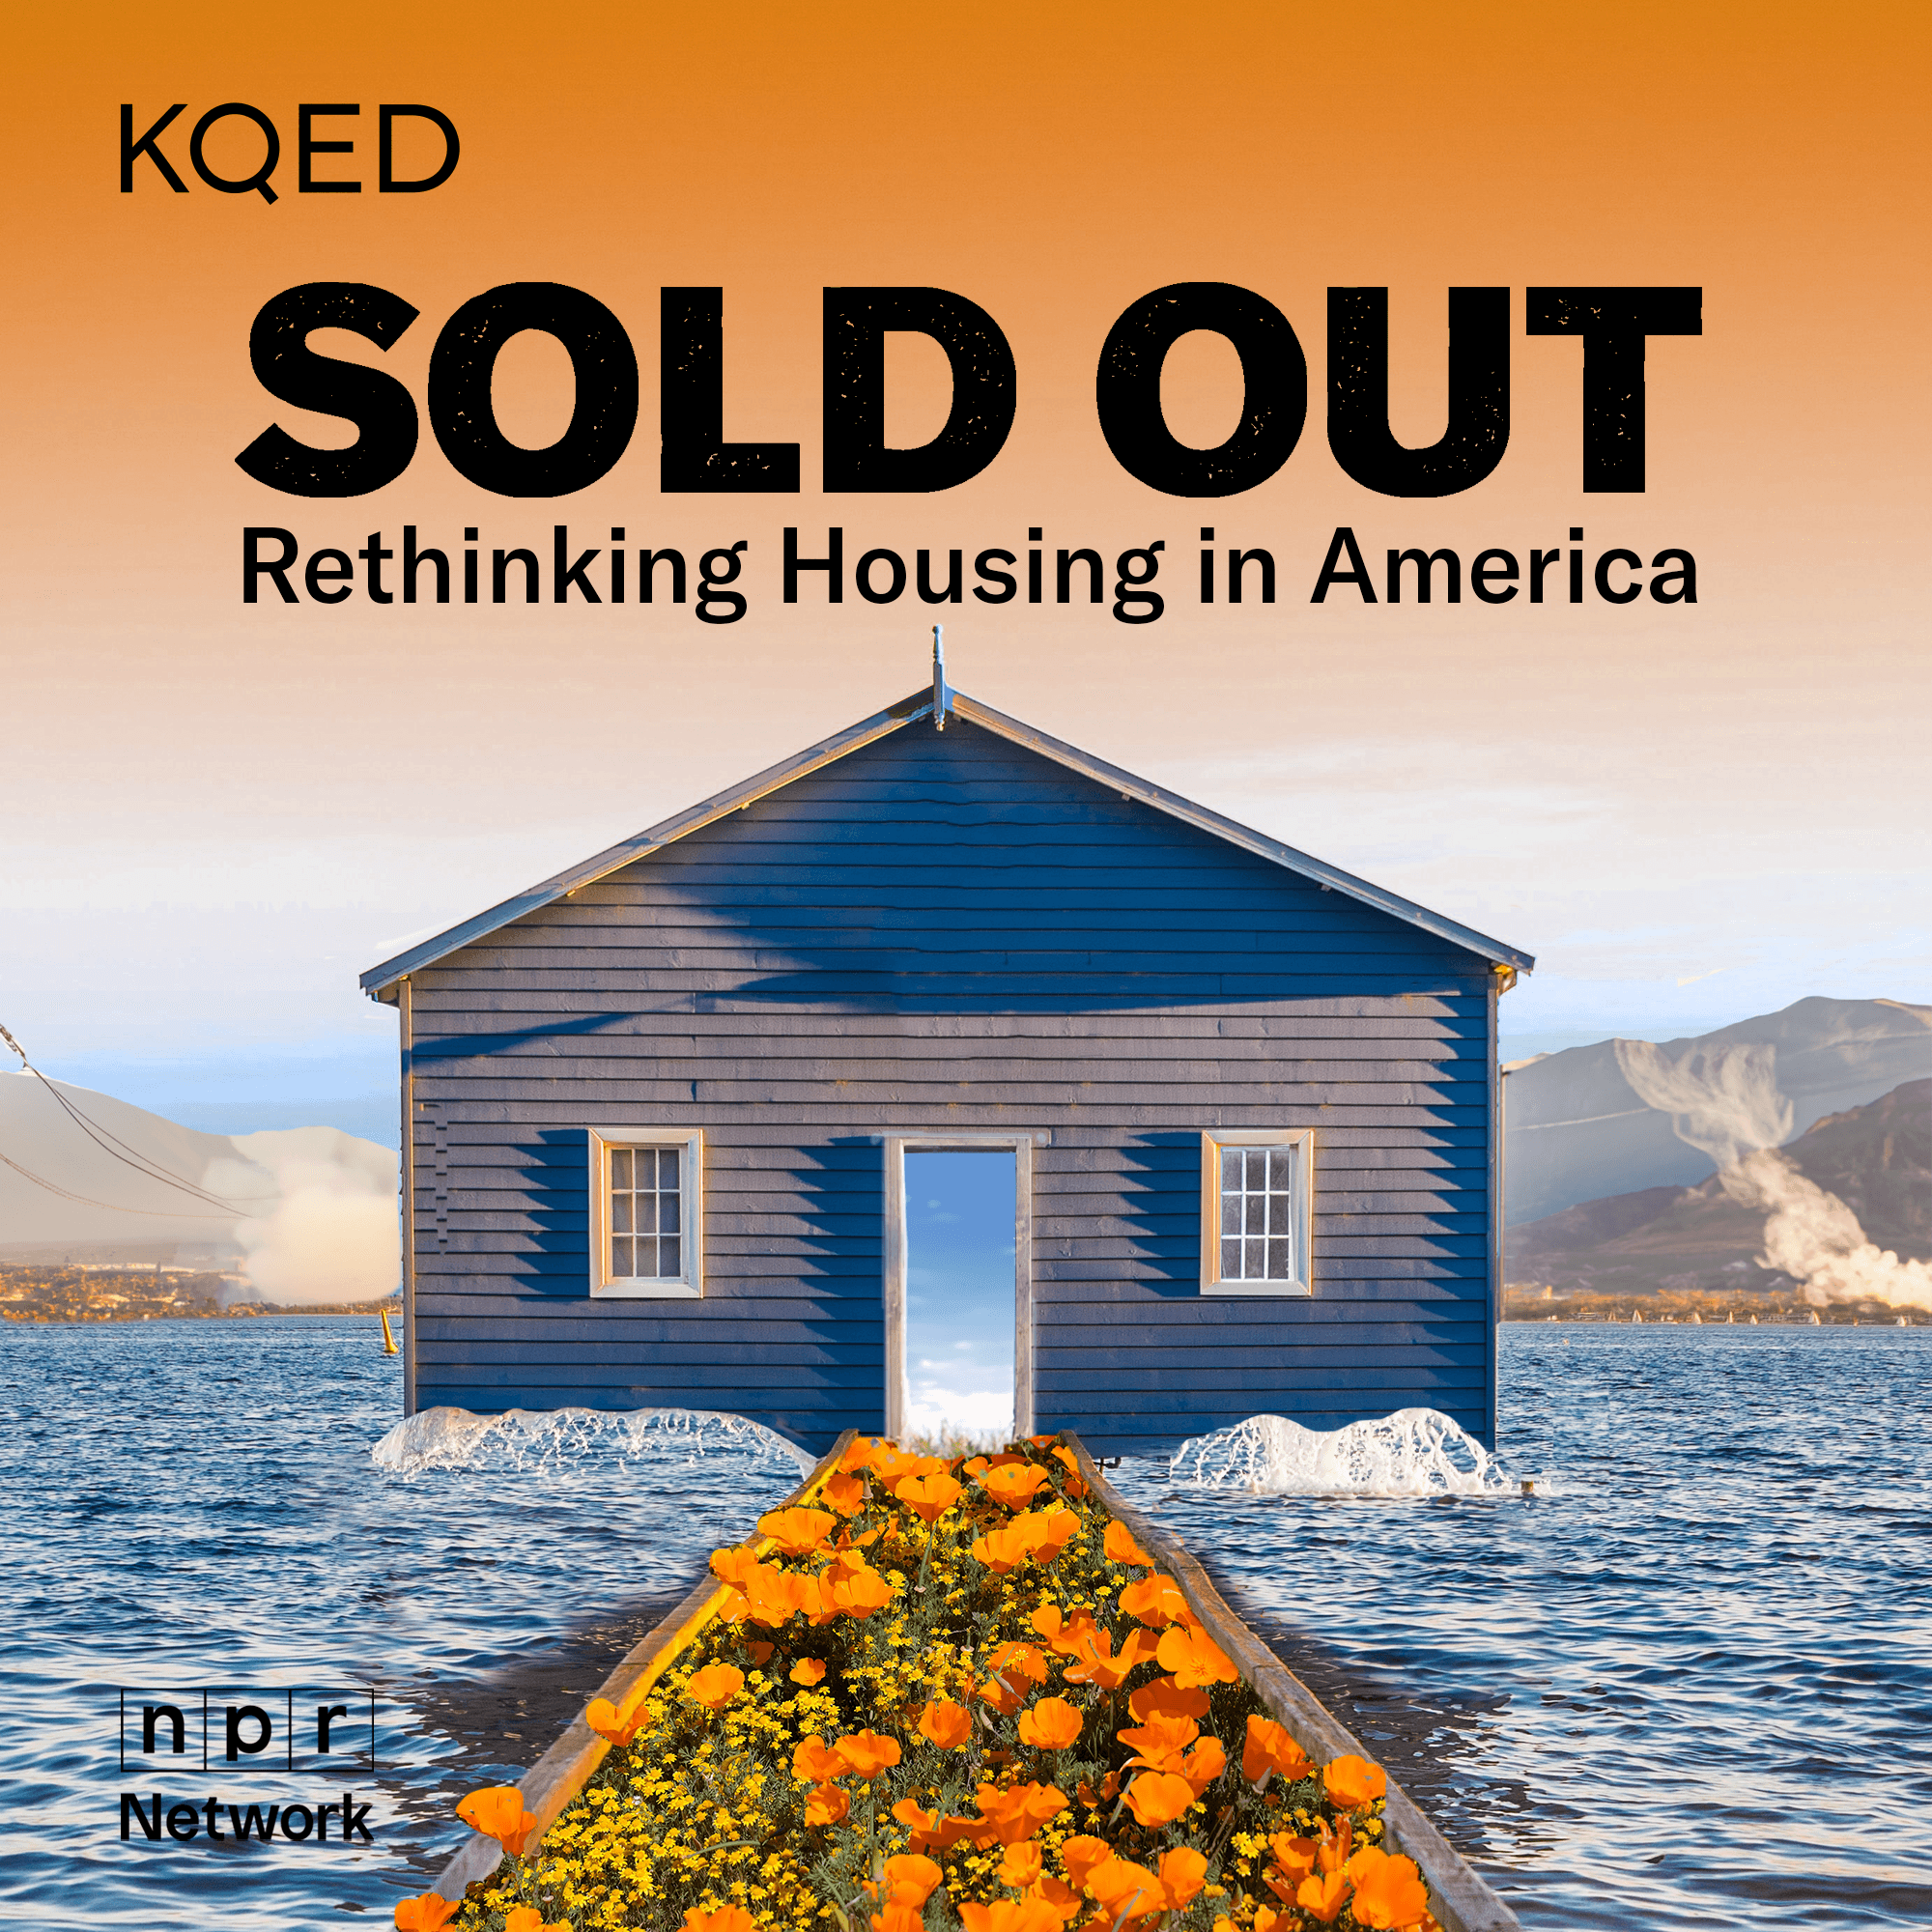 Thumbnail for "Presenting: KQED’s Sold Out: Rethinking Housing in America".